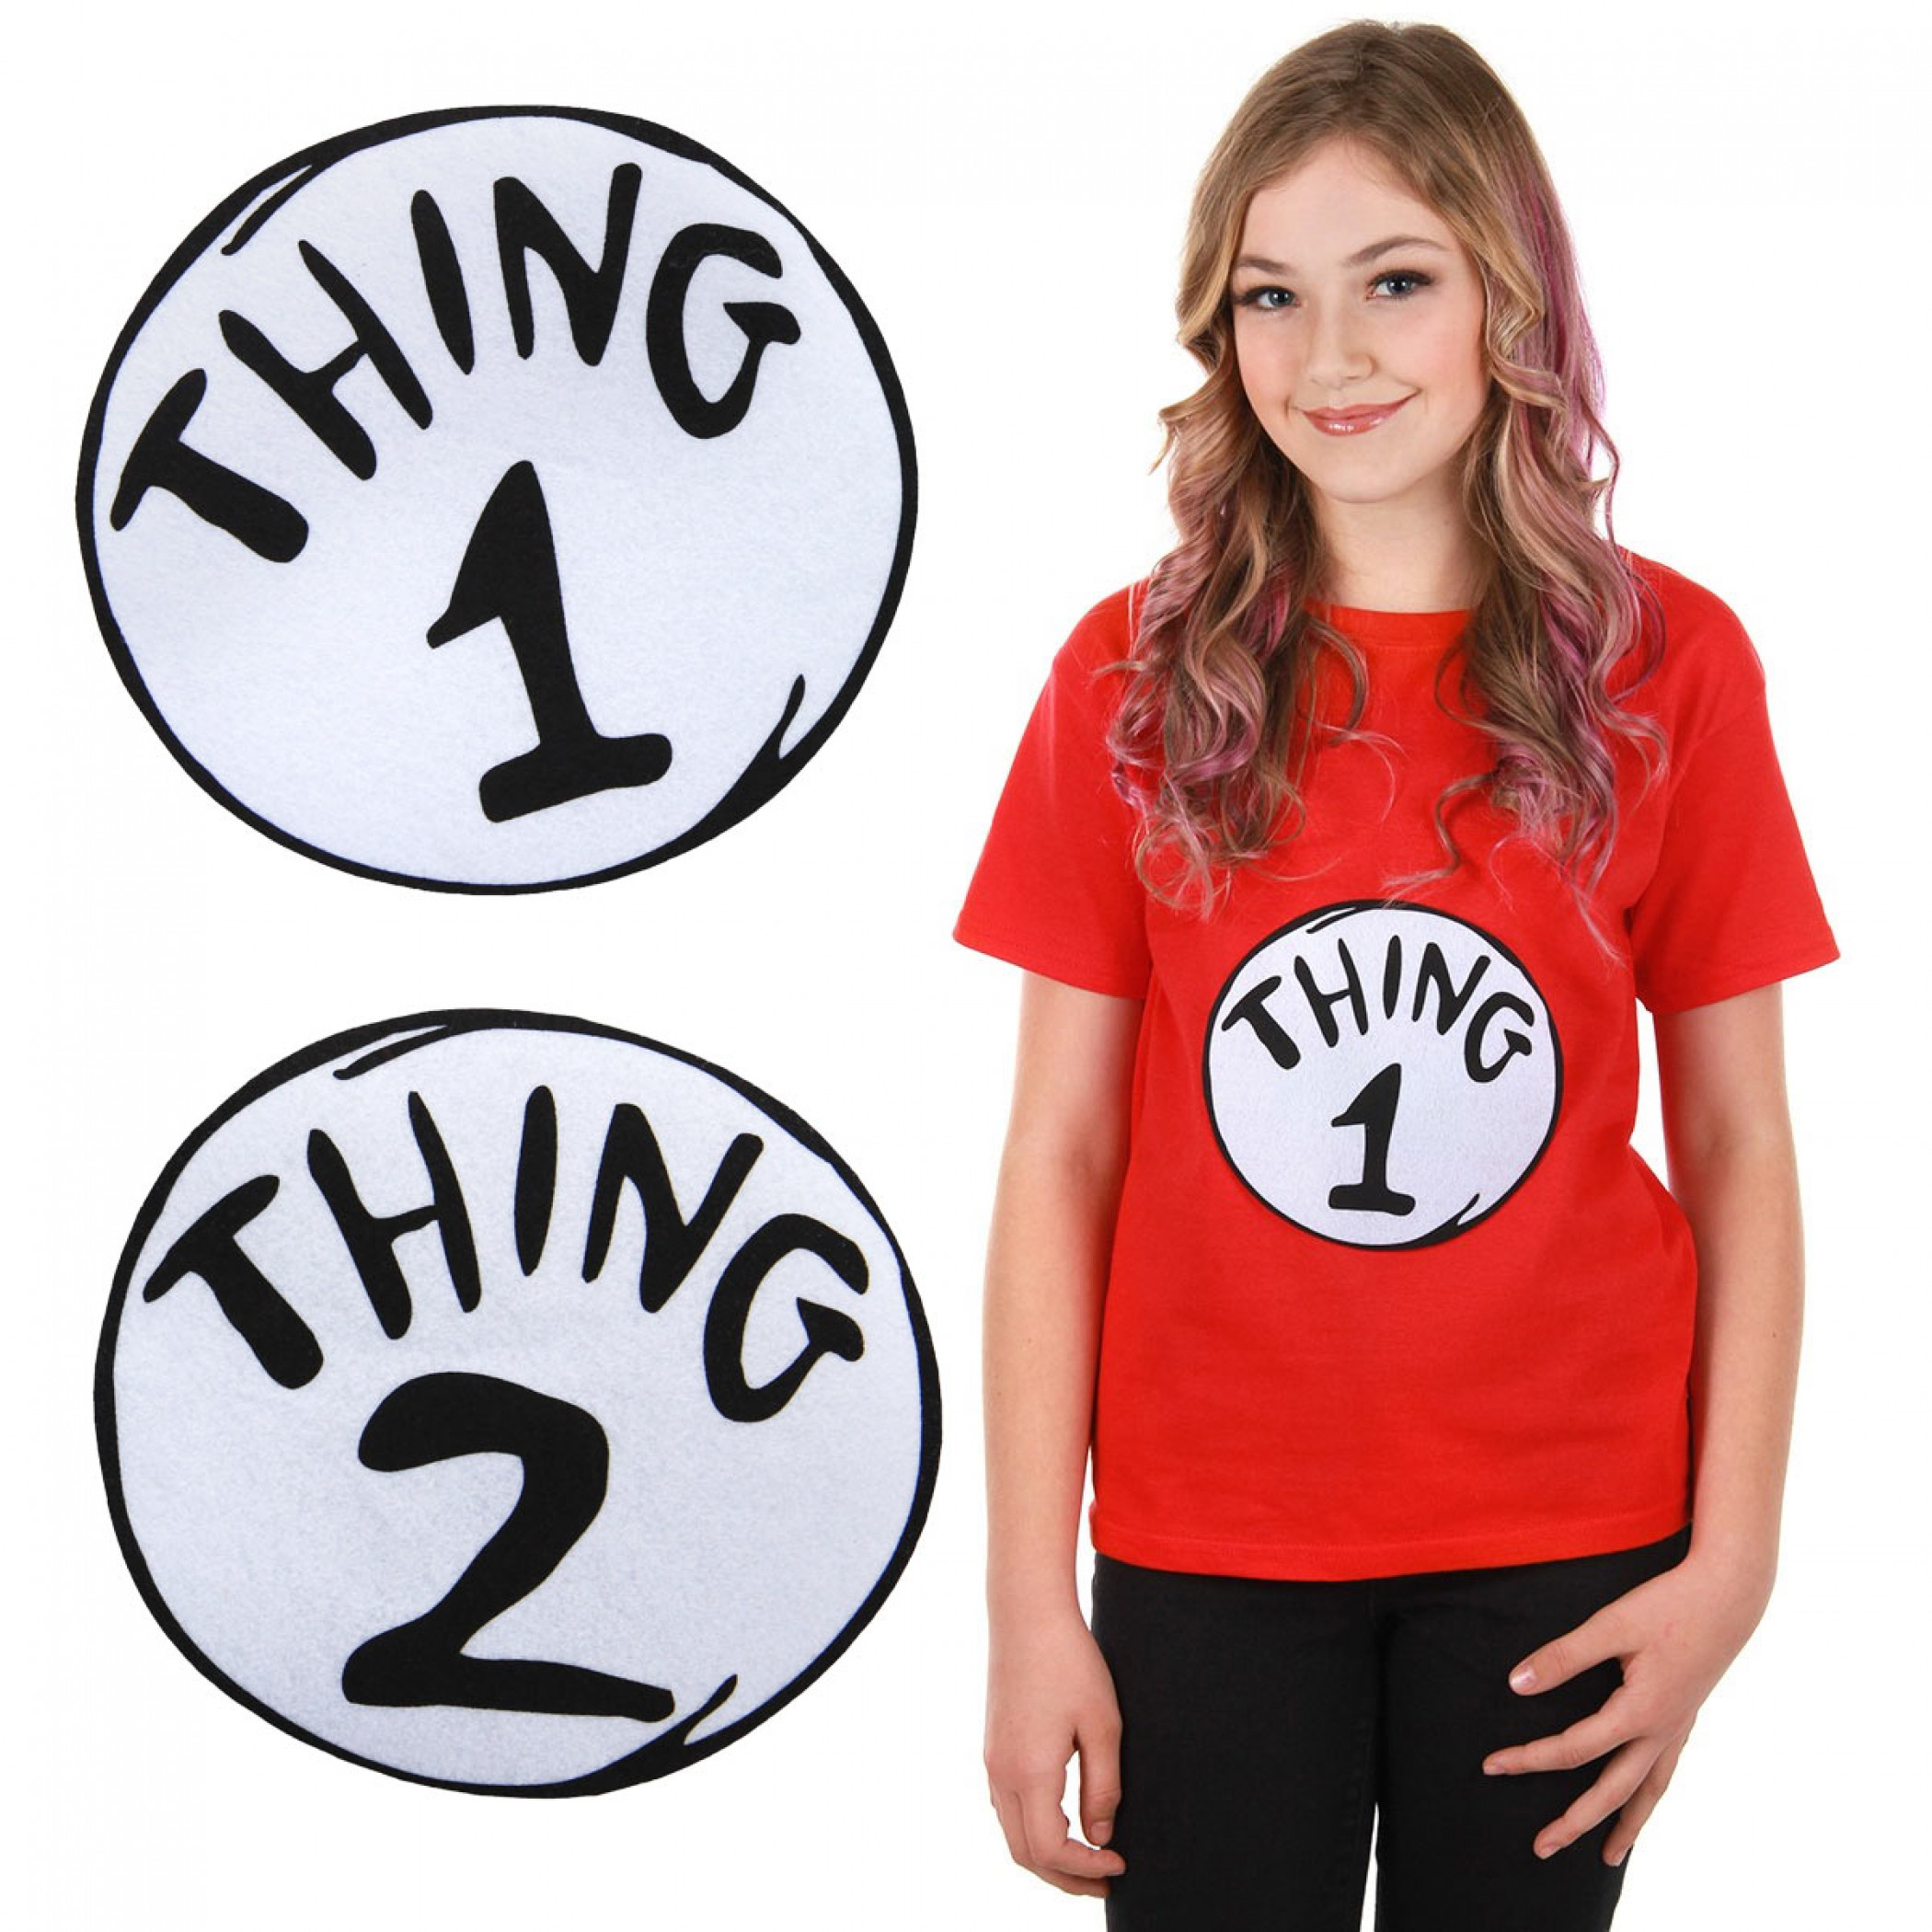 Dr. Seuss Thing 1 and 2 Patch Set